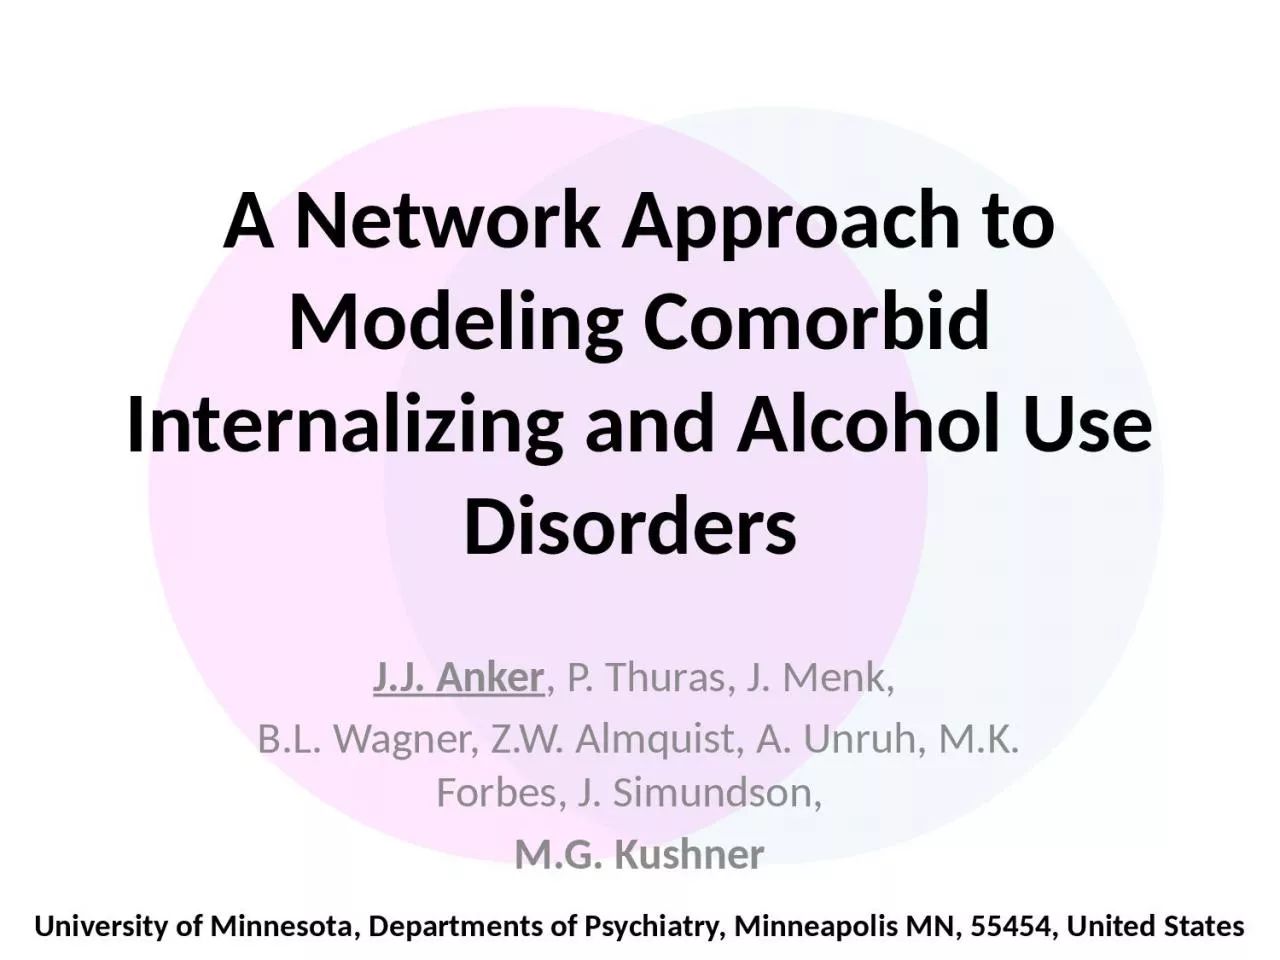 A Network Approach to Modeling Comorbid Internalizing and Alcohol Use Disorders